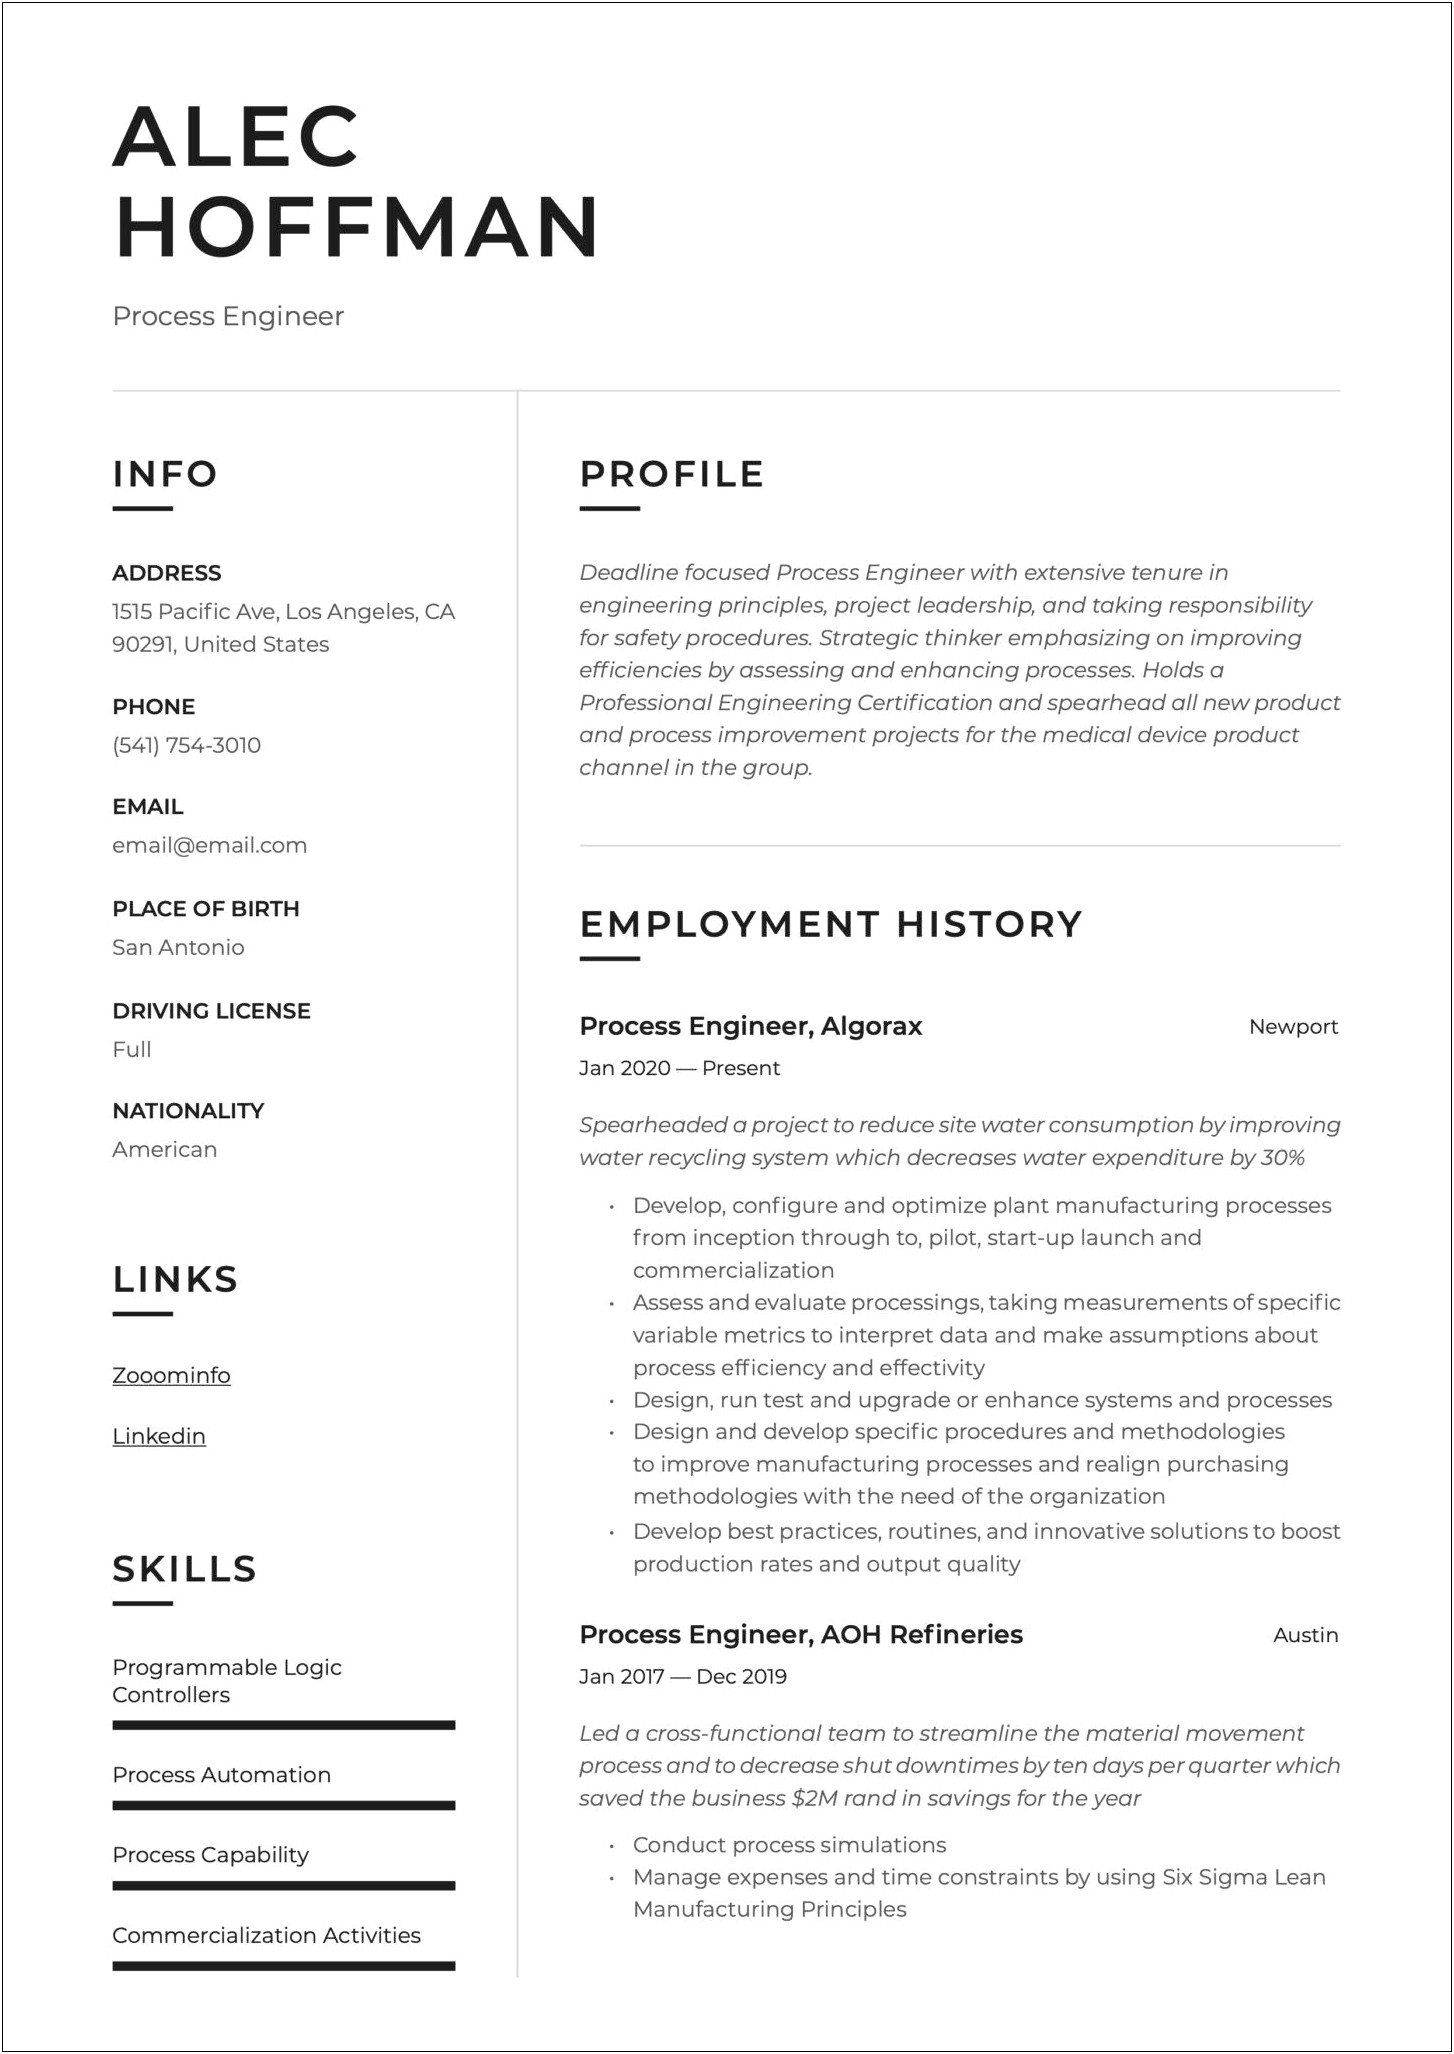 Experience Points For Engineer Resume